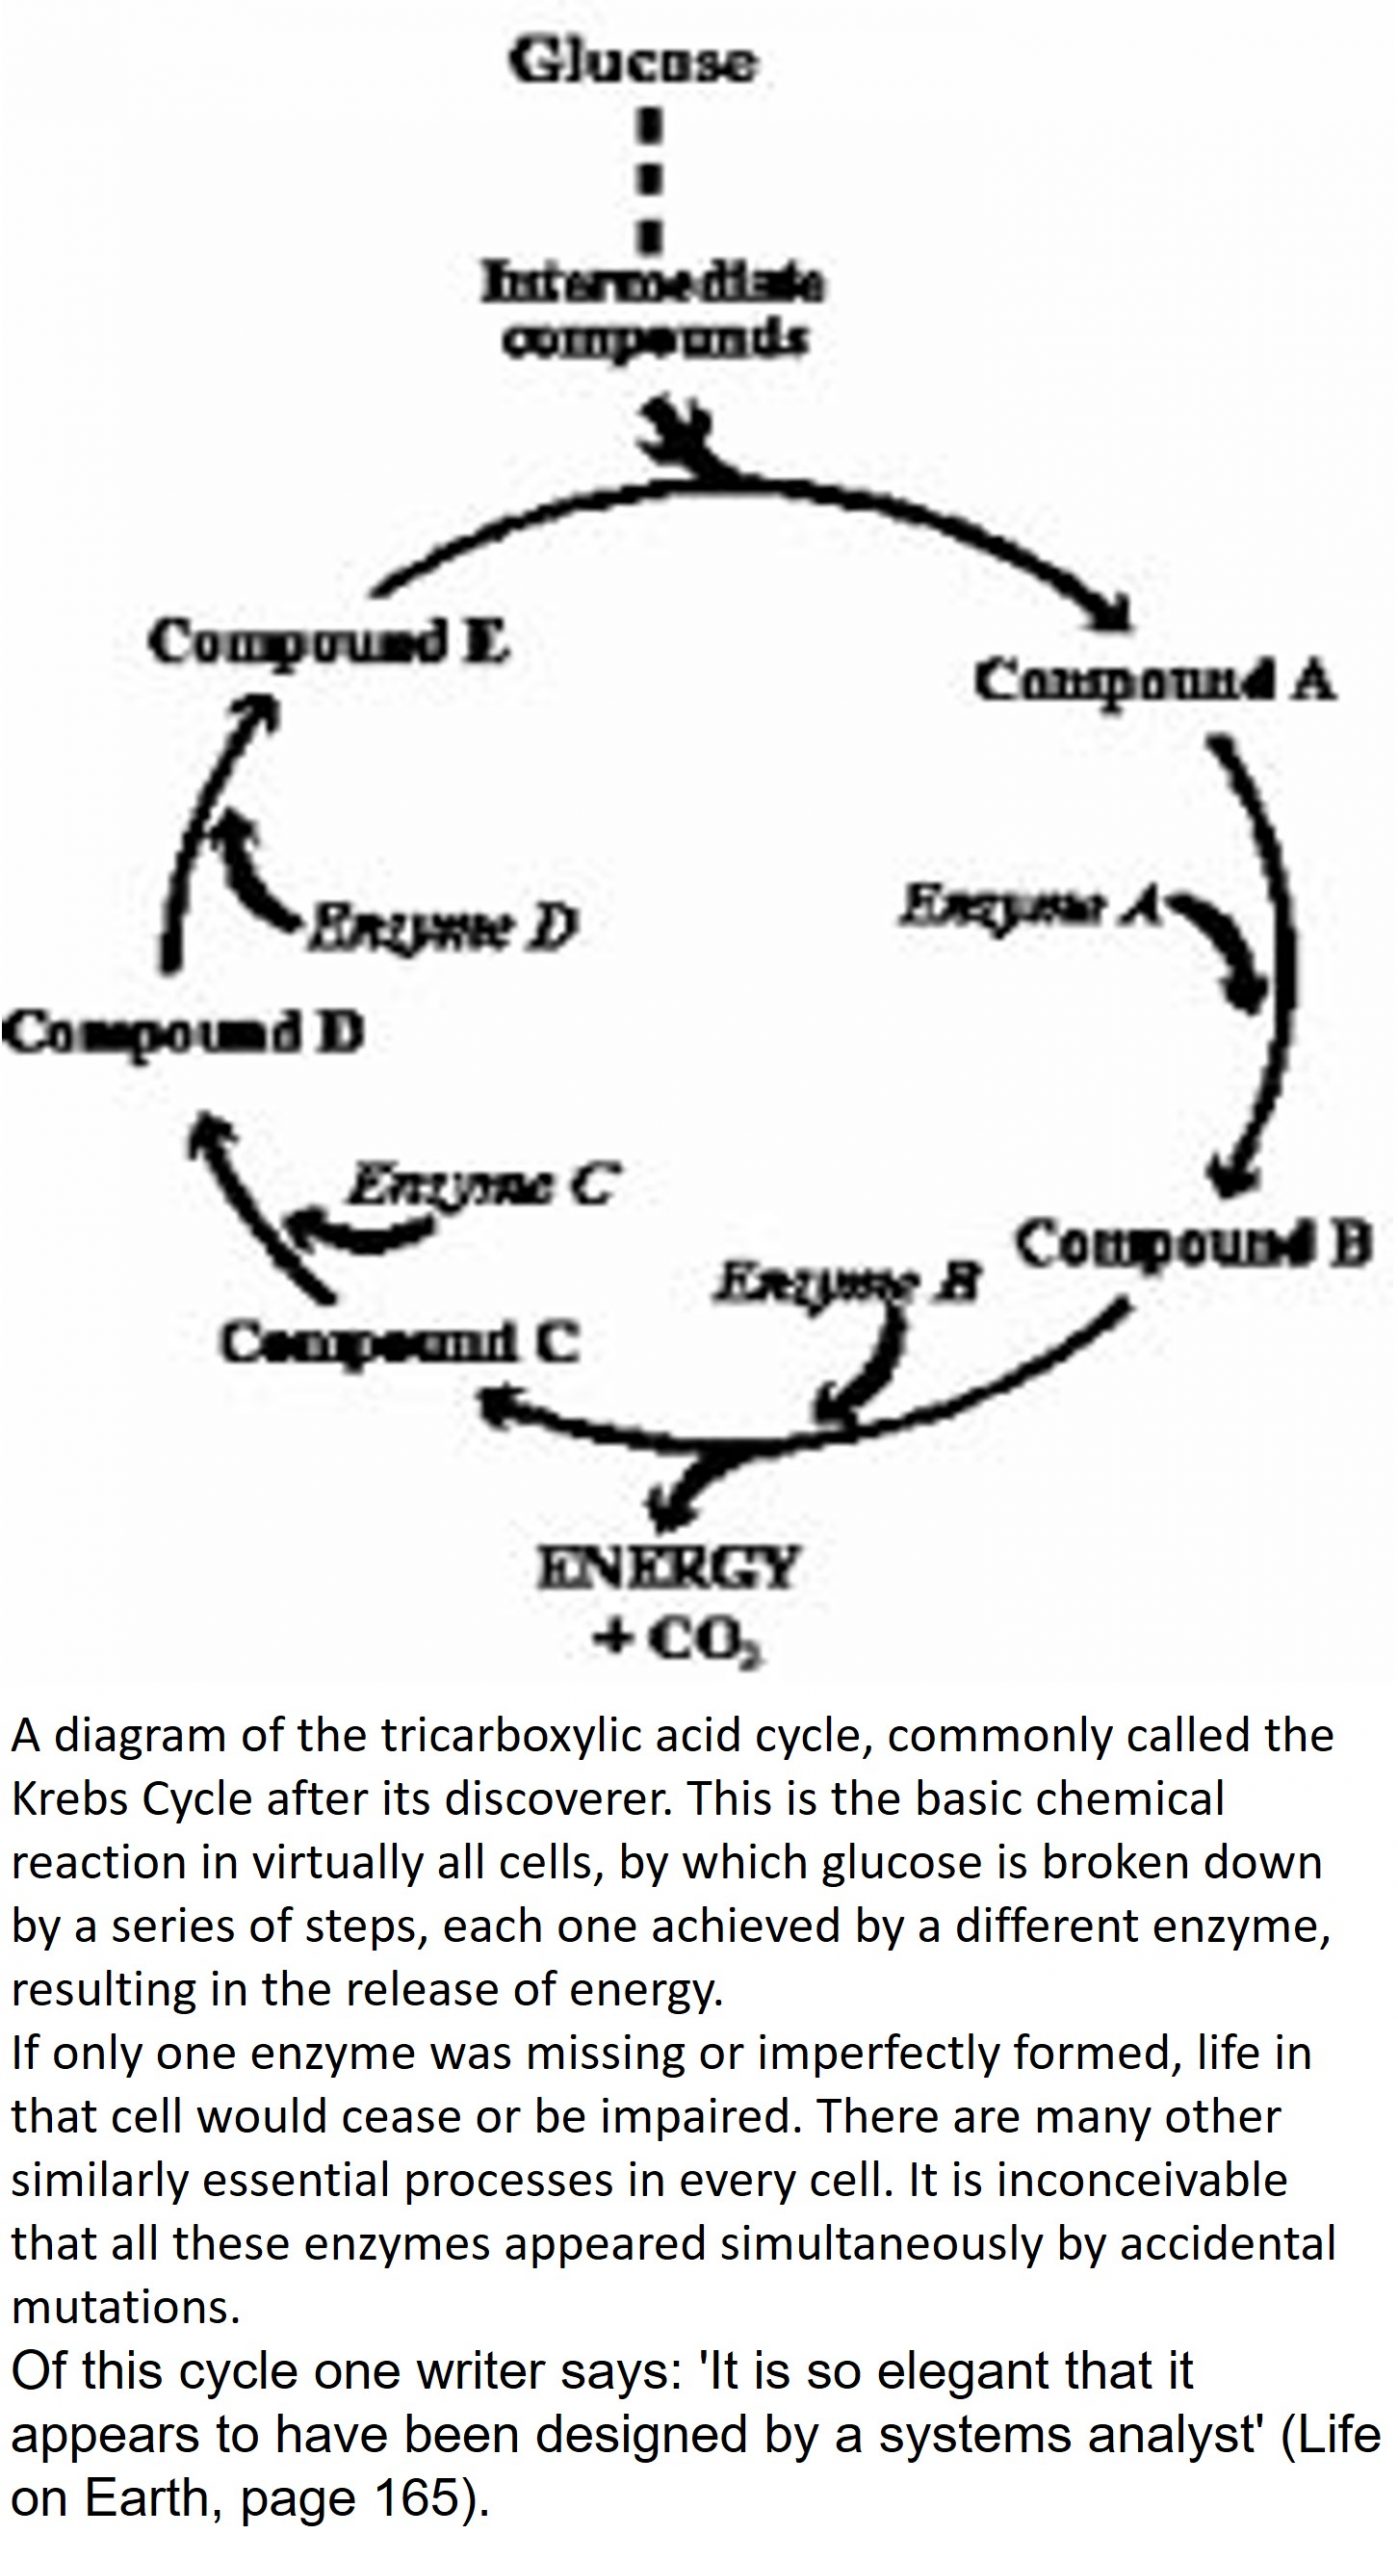 A diagram of the tricarboxylic acid cycle, commonly called the Krebs Cycle